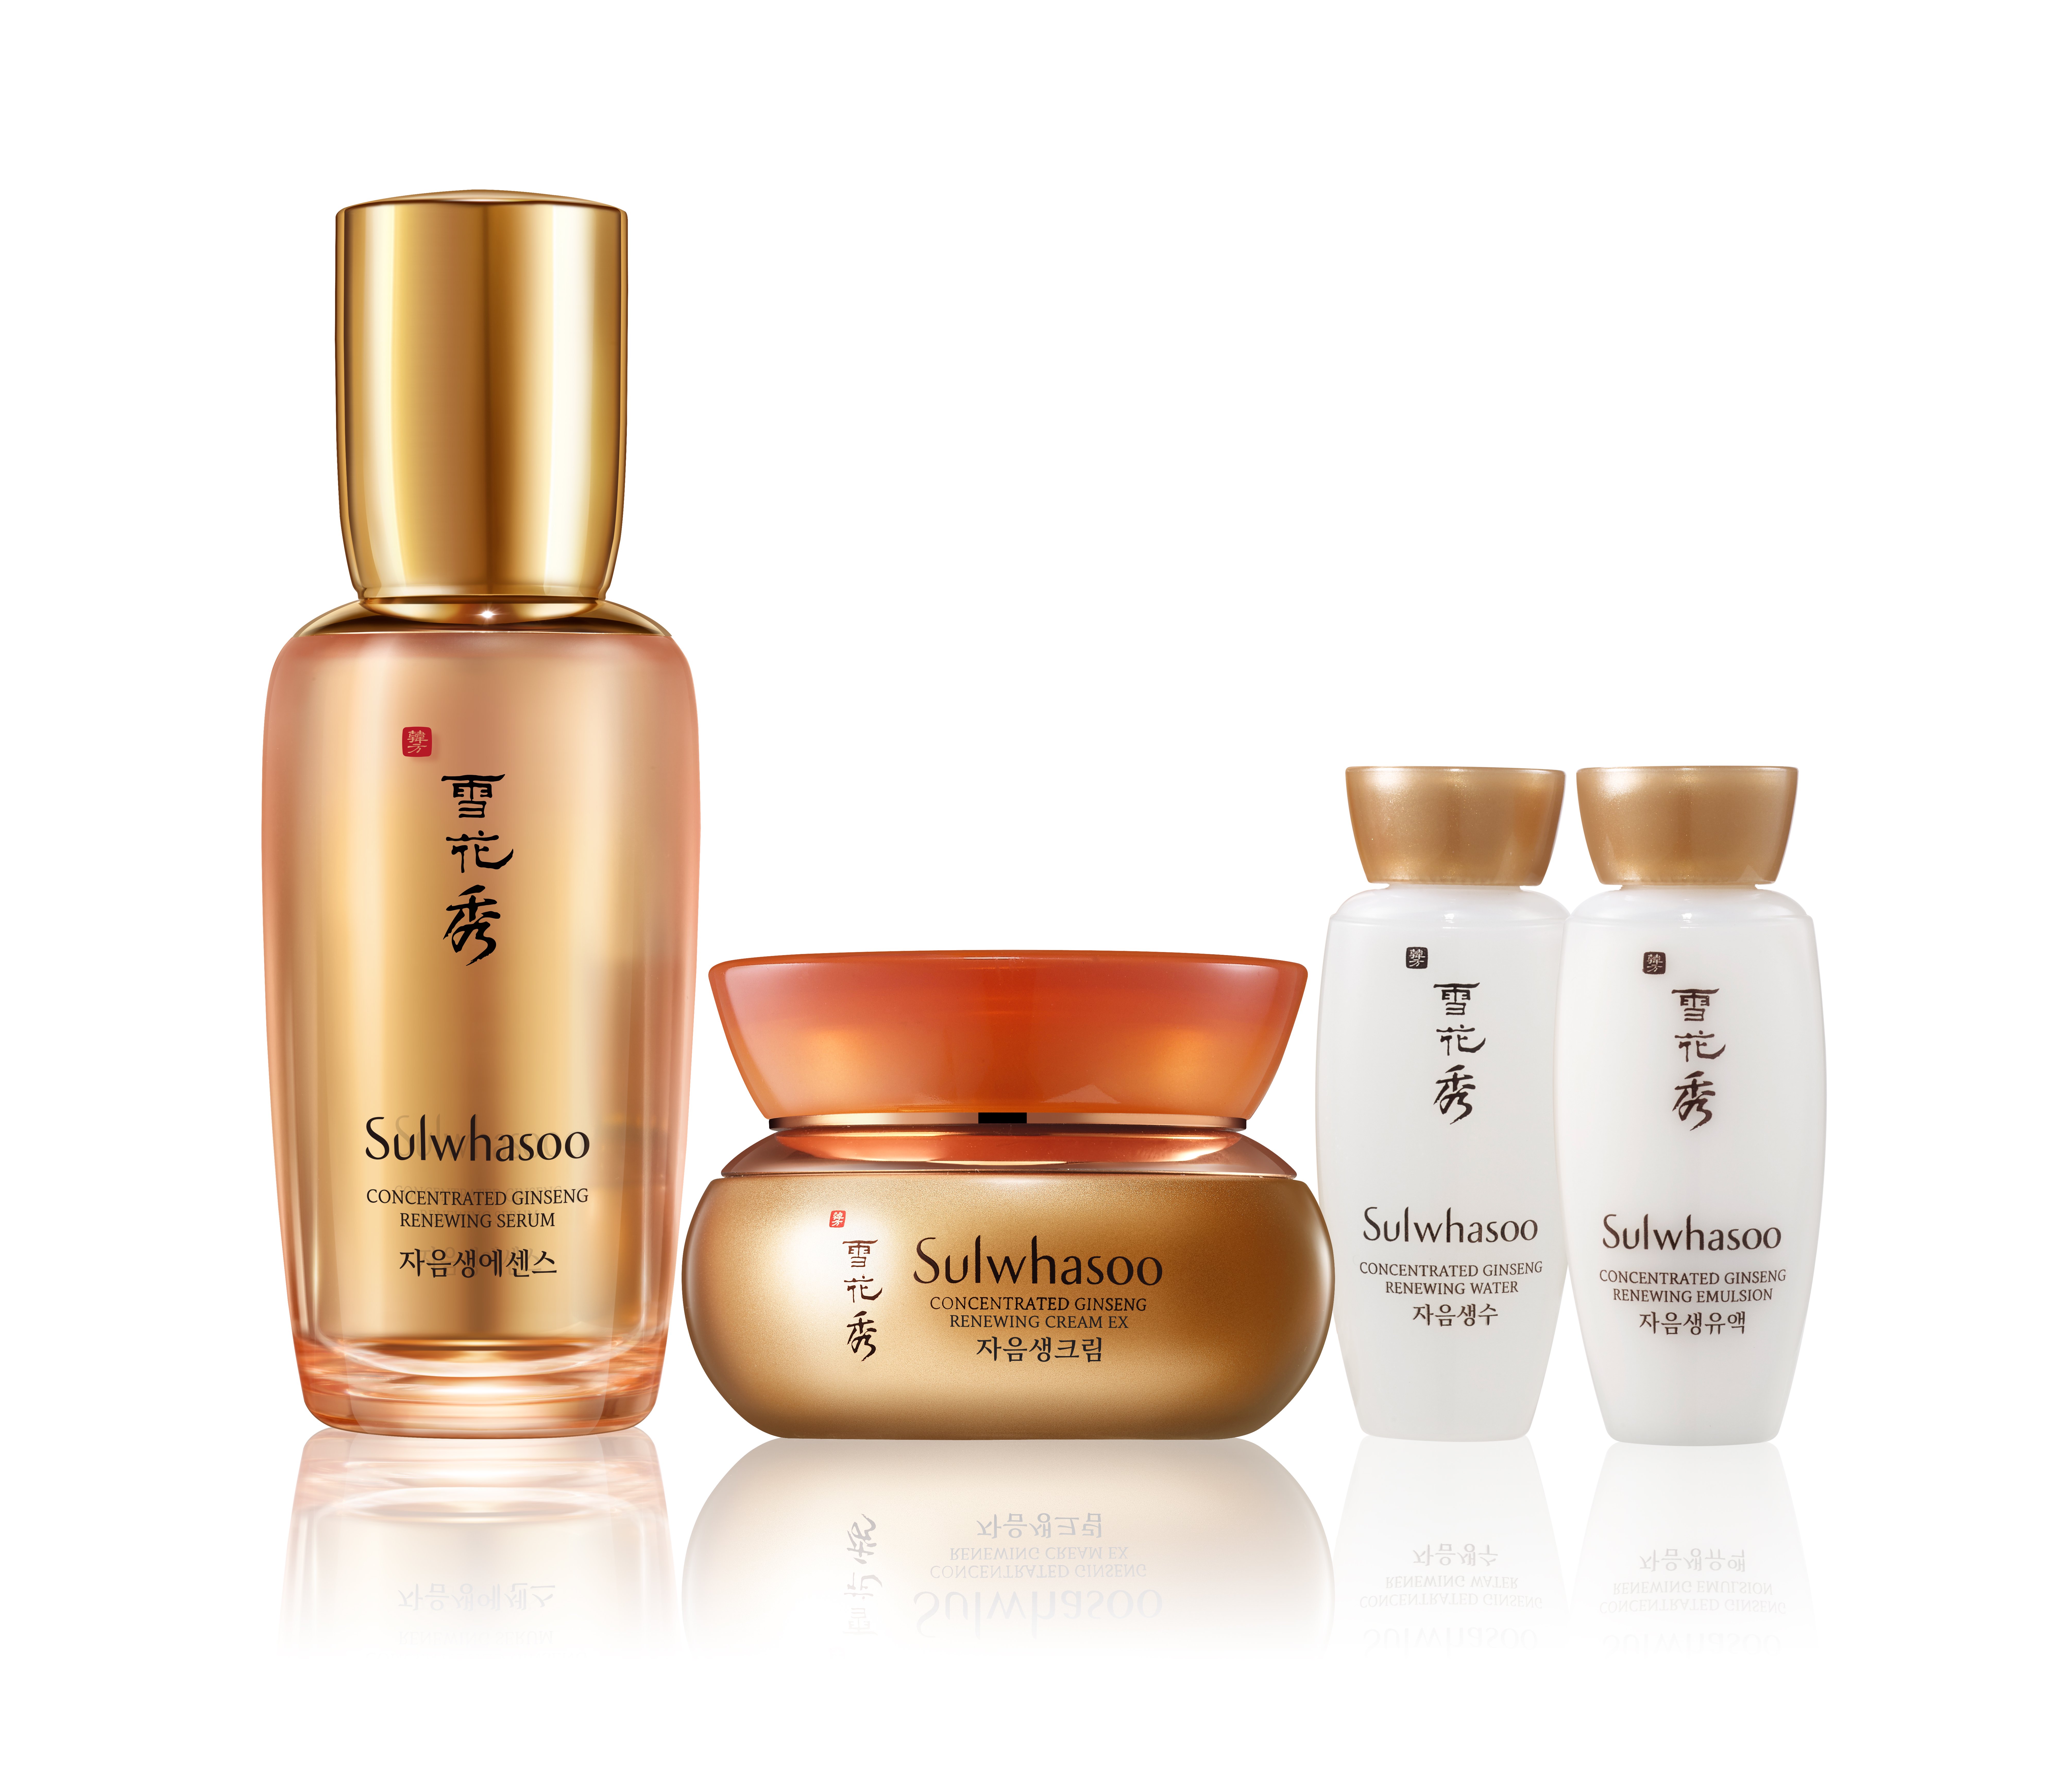 SULWHASOO CONCENTRATED GINSENG ANTIAGING TRIAL SET